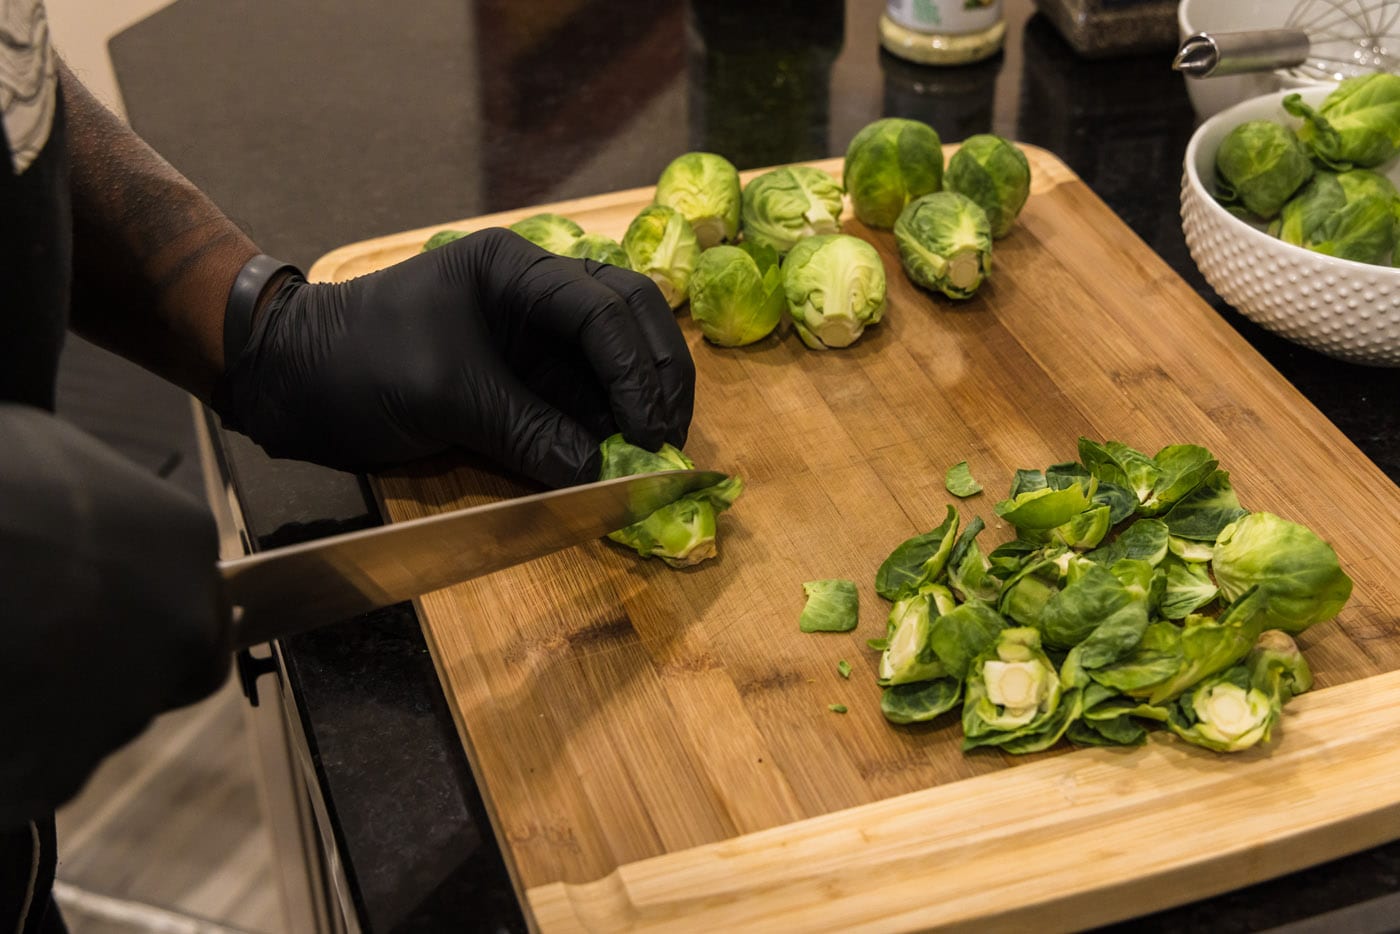 trimming brussels sprouts